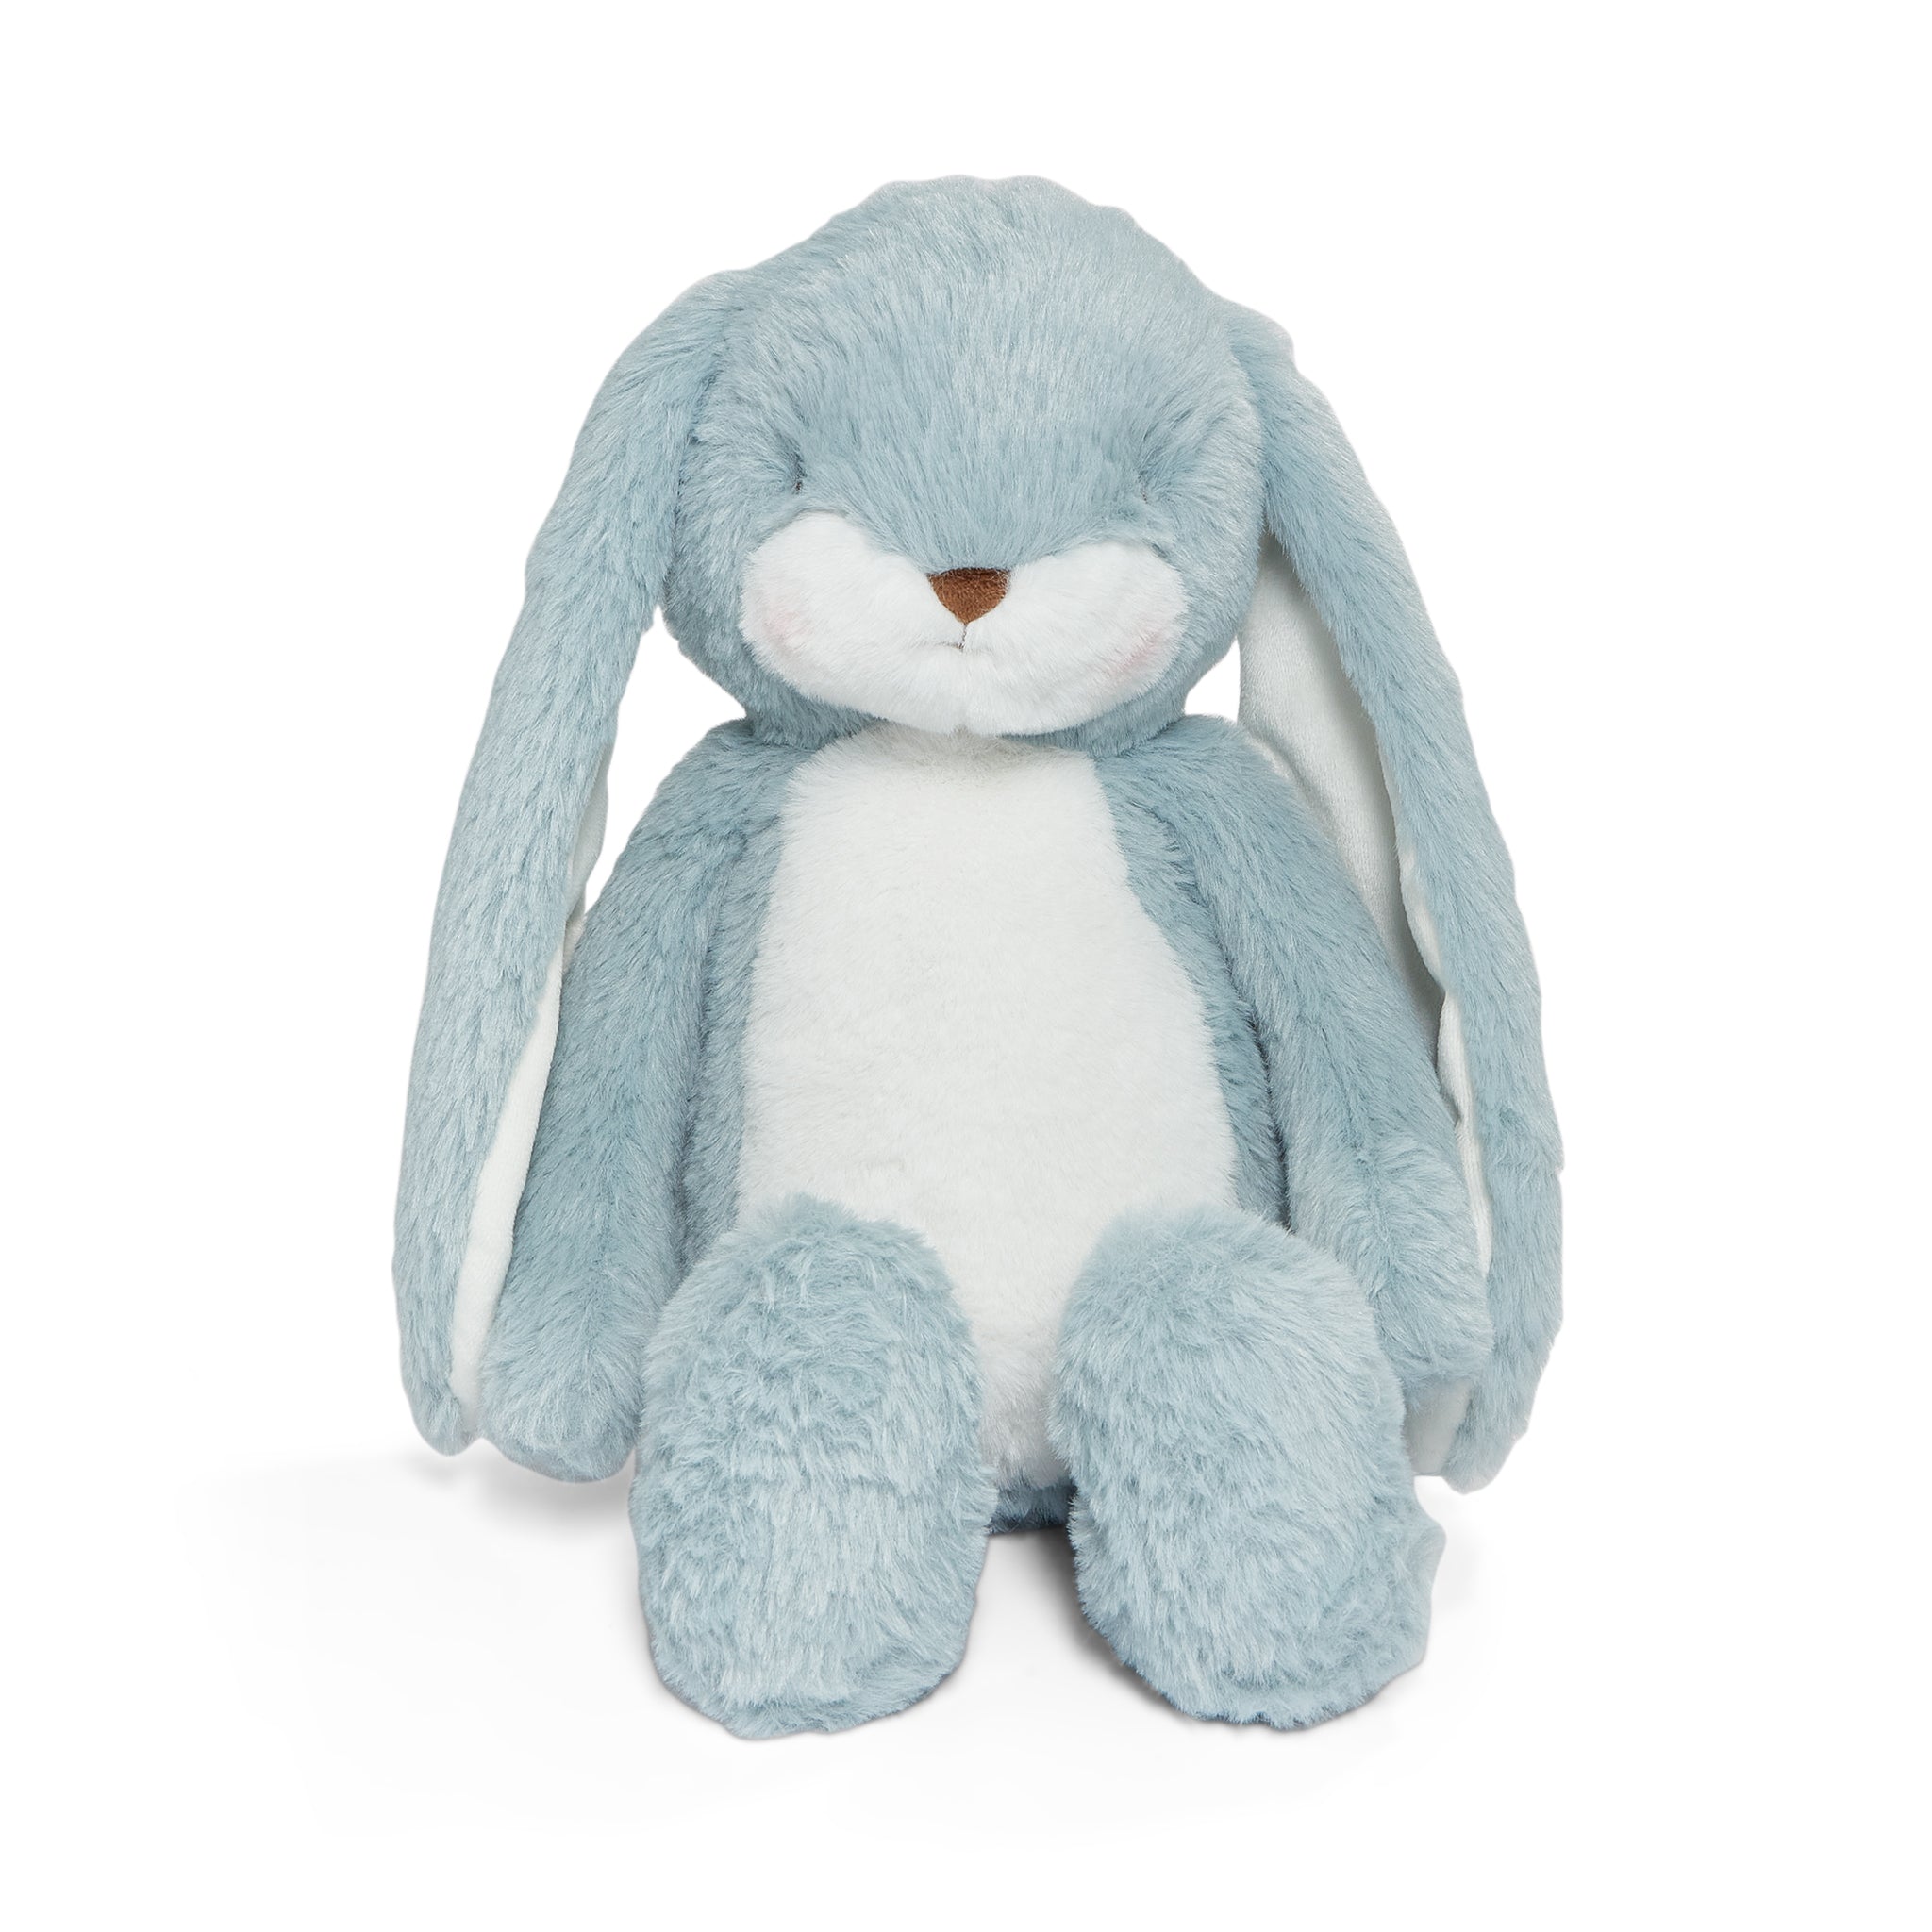 Sweet Floppy Nibble Bunny - Stormy Blue-Fluffle-SKU: 104428 - Bunnies By The Bay